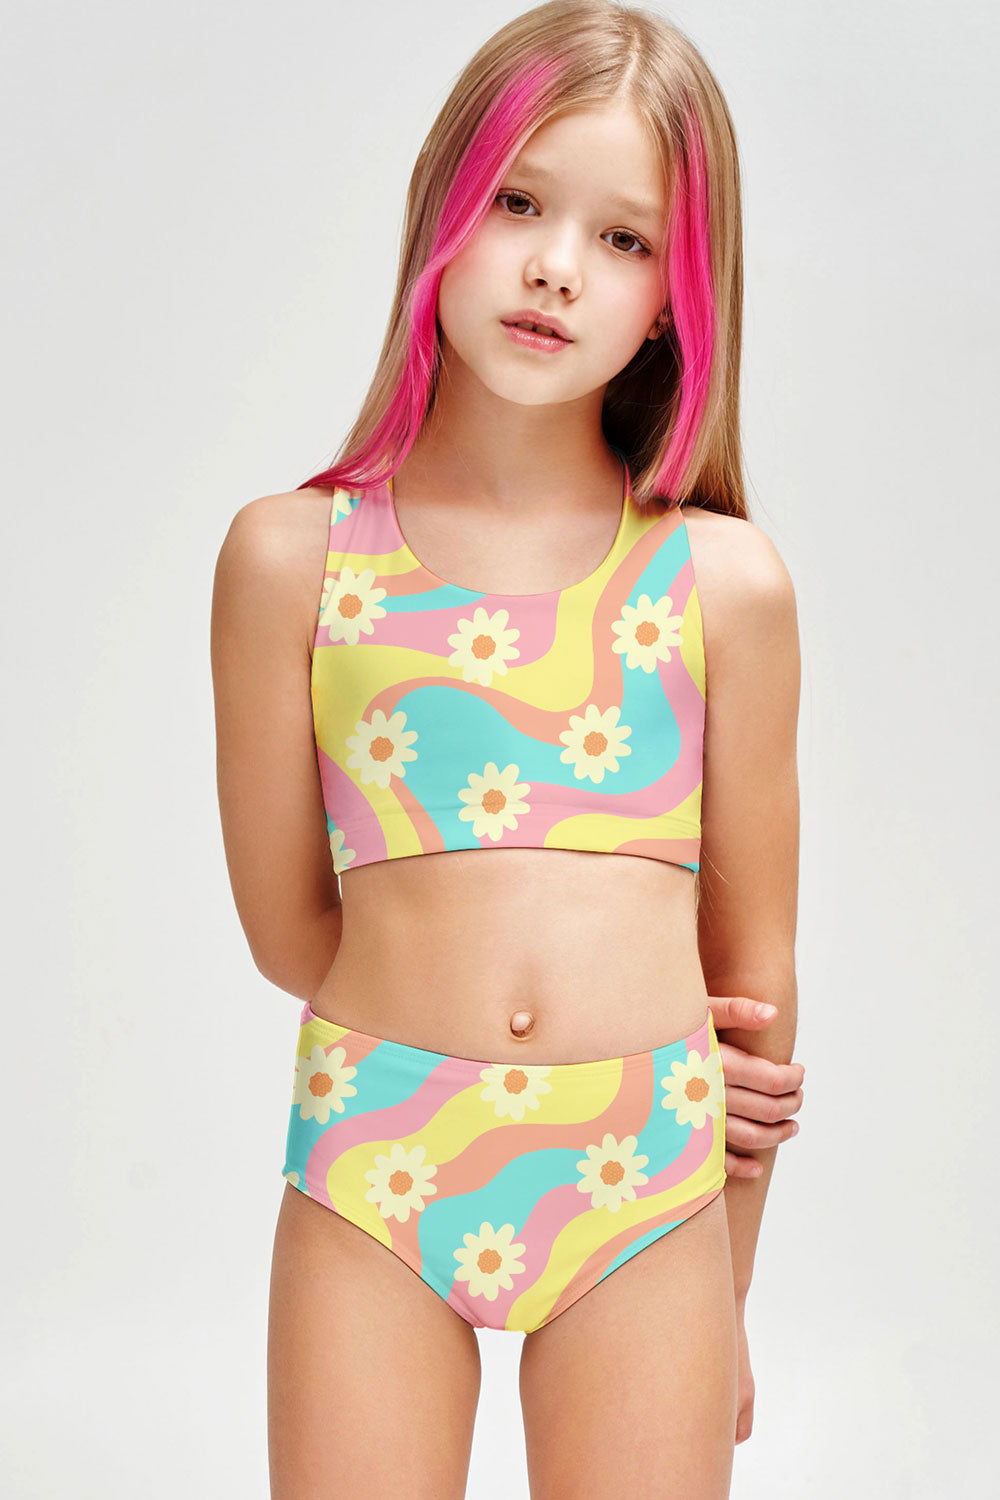 Festival Girl Claire Yellow Two-Piece Swimsuit Sporty Set - Girls - Pineapple Clothing